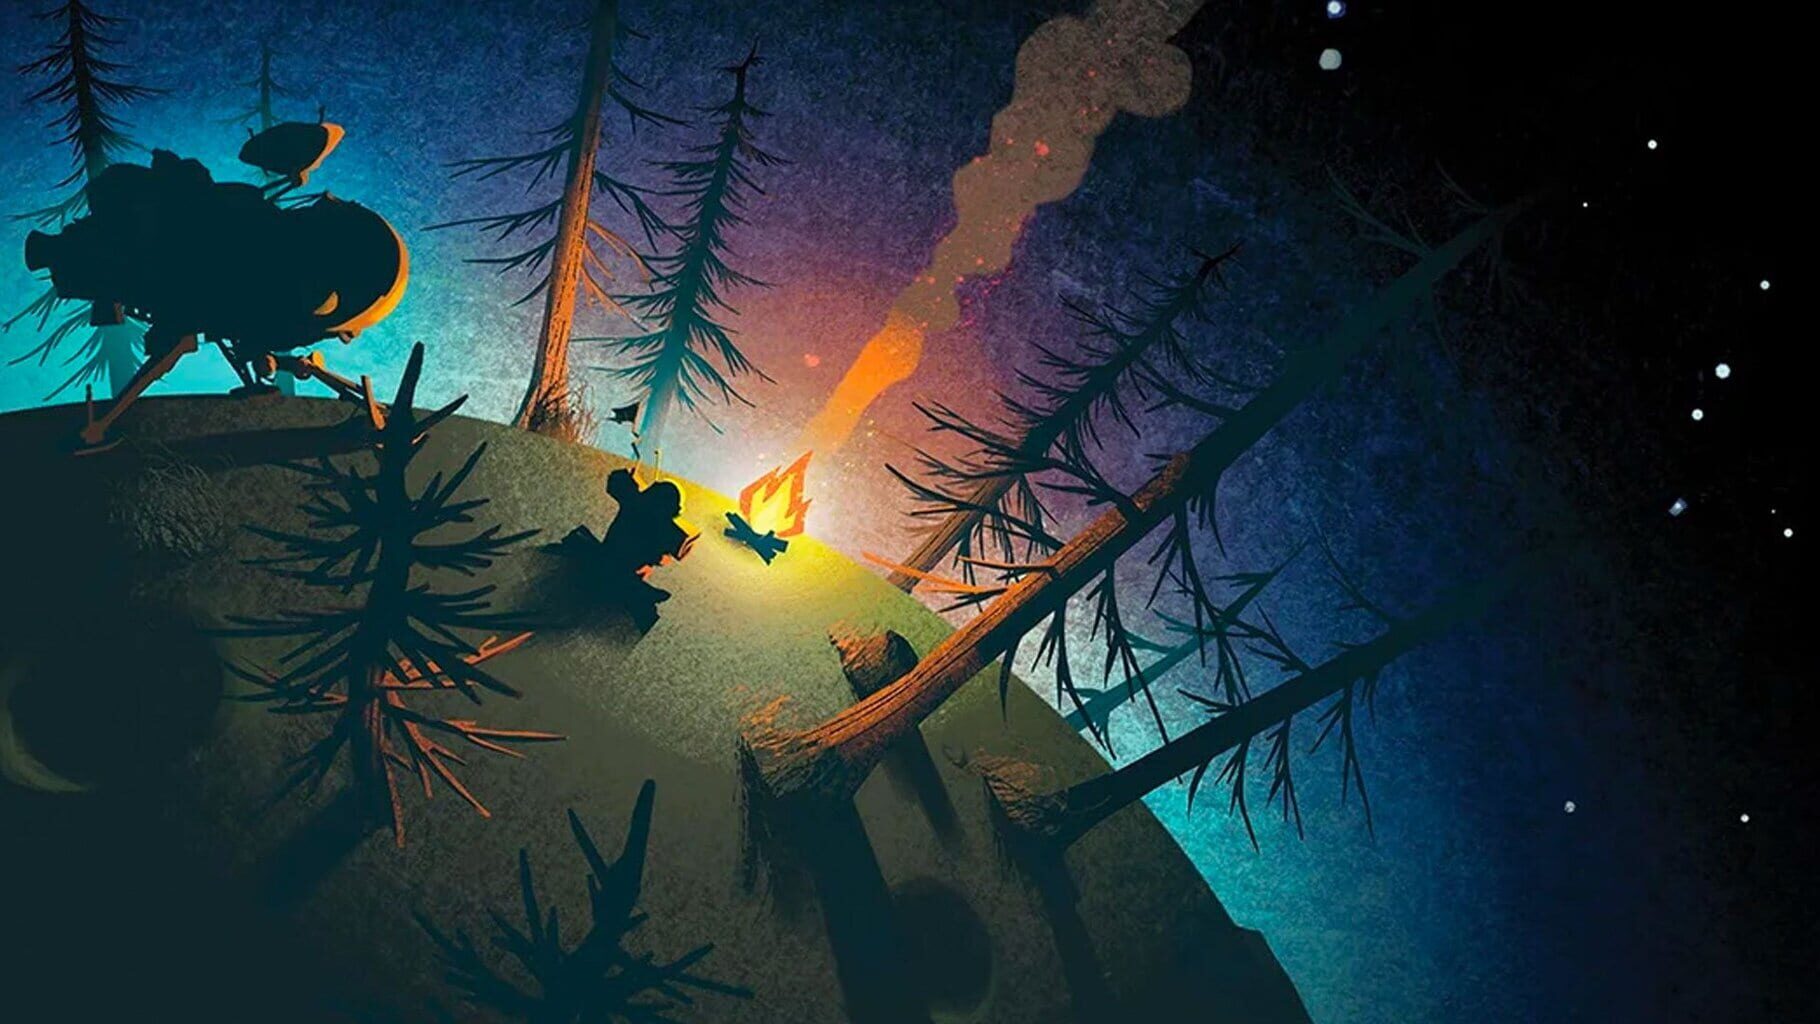 Outer Wilds artwork